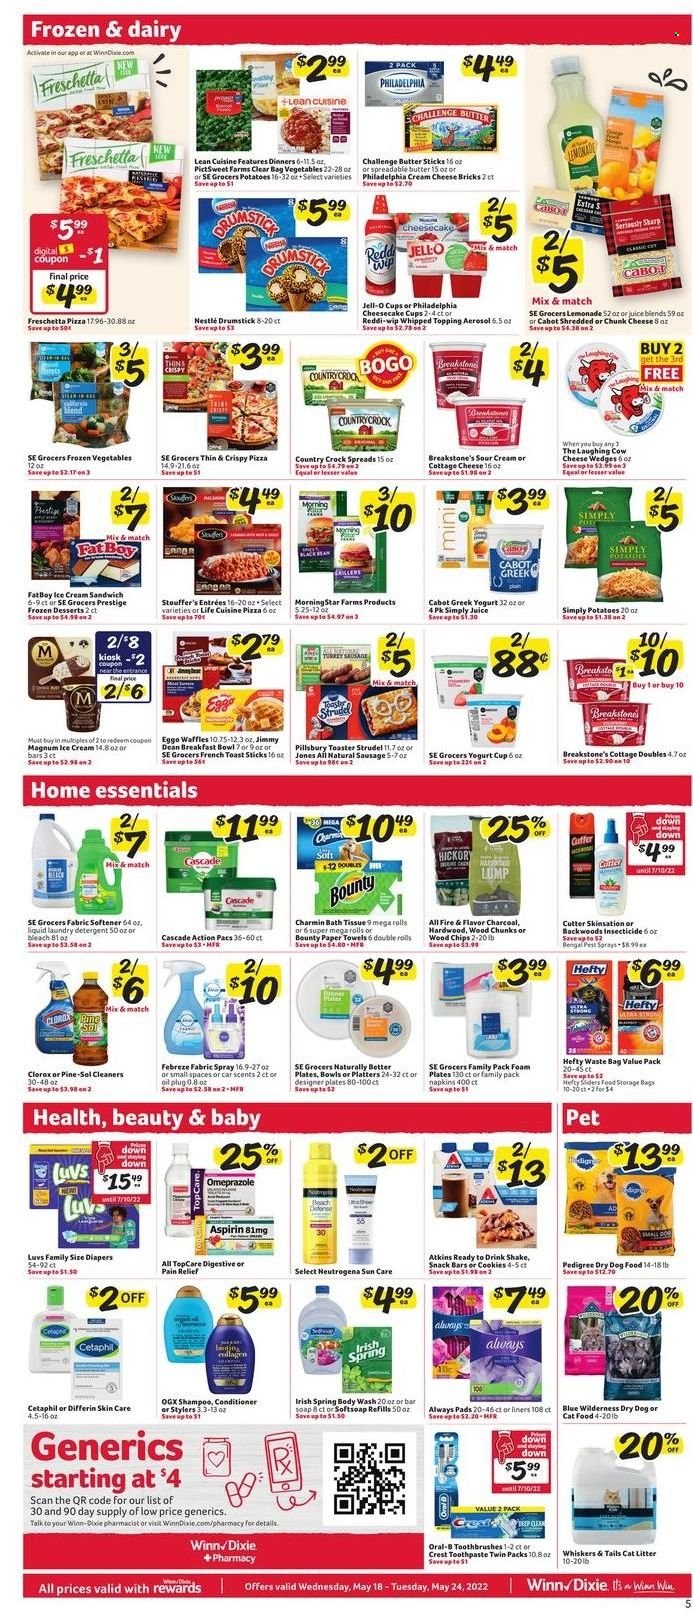 thumbnail - Winn Dixie Flyer - 05/18/2022 - 05/24/2022 - Sales products - strudel, waffles, potatoes, pizza, breakfast bowl, Pillsbury, MorningStar Farms, Lean Cuisine, sausage, cottage cheese, cream cheese, Philadelphia, The Laughing Cow, chunk cheese, greek yoghurt, yoghurt, shake, butter, spreadable butter, sour cream, ice cream, ice cream sandwich, frozen vegetables, Stouffer's, cookies, Nestlé, snack, Bounty, snack bar, Thins, topping, Jell-O, lemonade, juice, napkins, nappies, bath tissue, kitchen towels, paper towels, Charmin, detergent, Febreze, bleach, Clorox, Pine-Sol, Cascade, fabric softener, laundry detergent, body wash, shampoo, Softsoap, soap bar, soap, Oral-B, toothpaste, Crest, Always pads, Neutrogena, OGX, conditioner, Hefty, waste bag, insecticide, storage bag, plate, cup, Sharp, cutter, foam plates, animal food, cat litter, cat food, Pedigree, Blue Wilderness, pain relief, aspirin. Page 5.